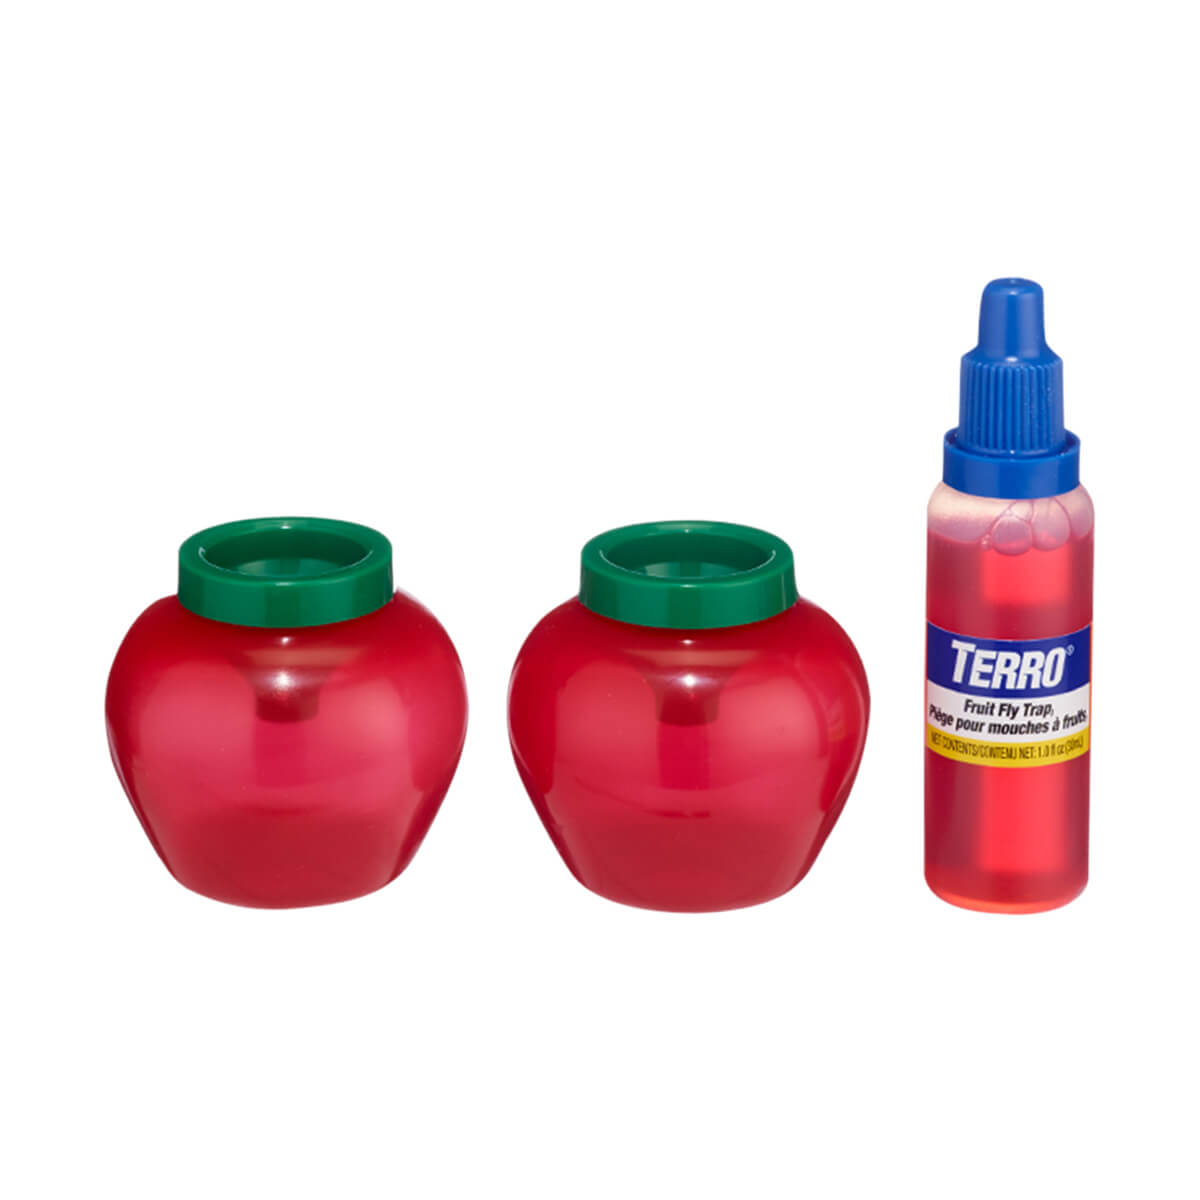 TERRO® Fruit Fly Trap - 2 Pack